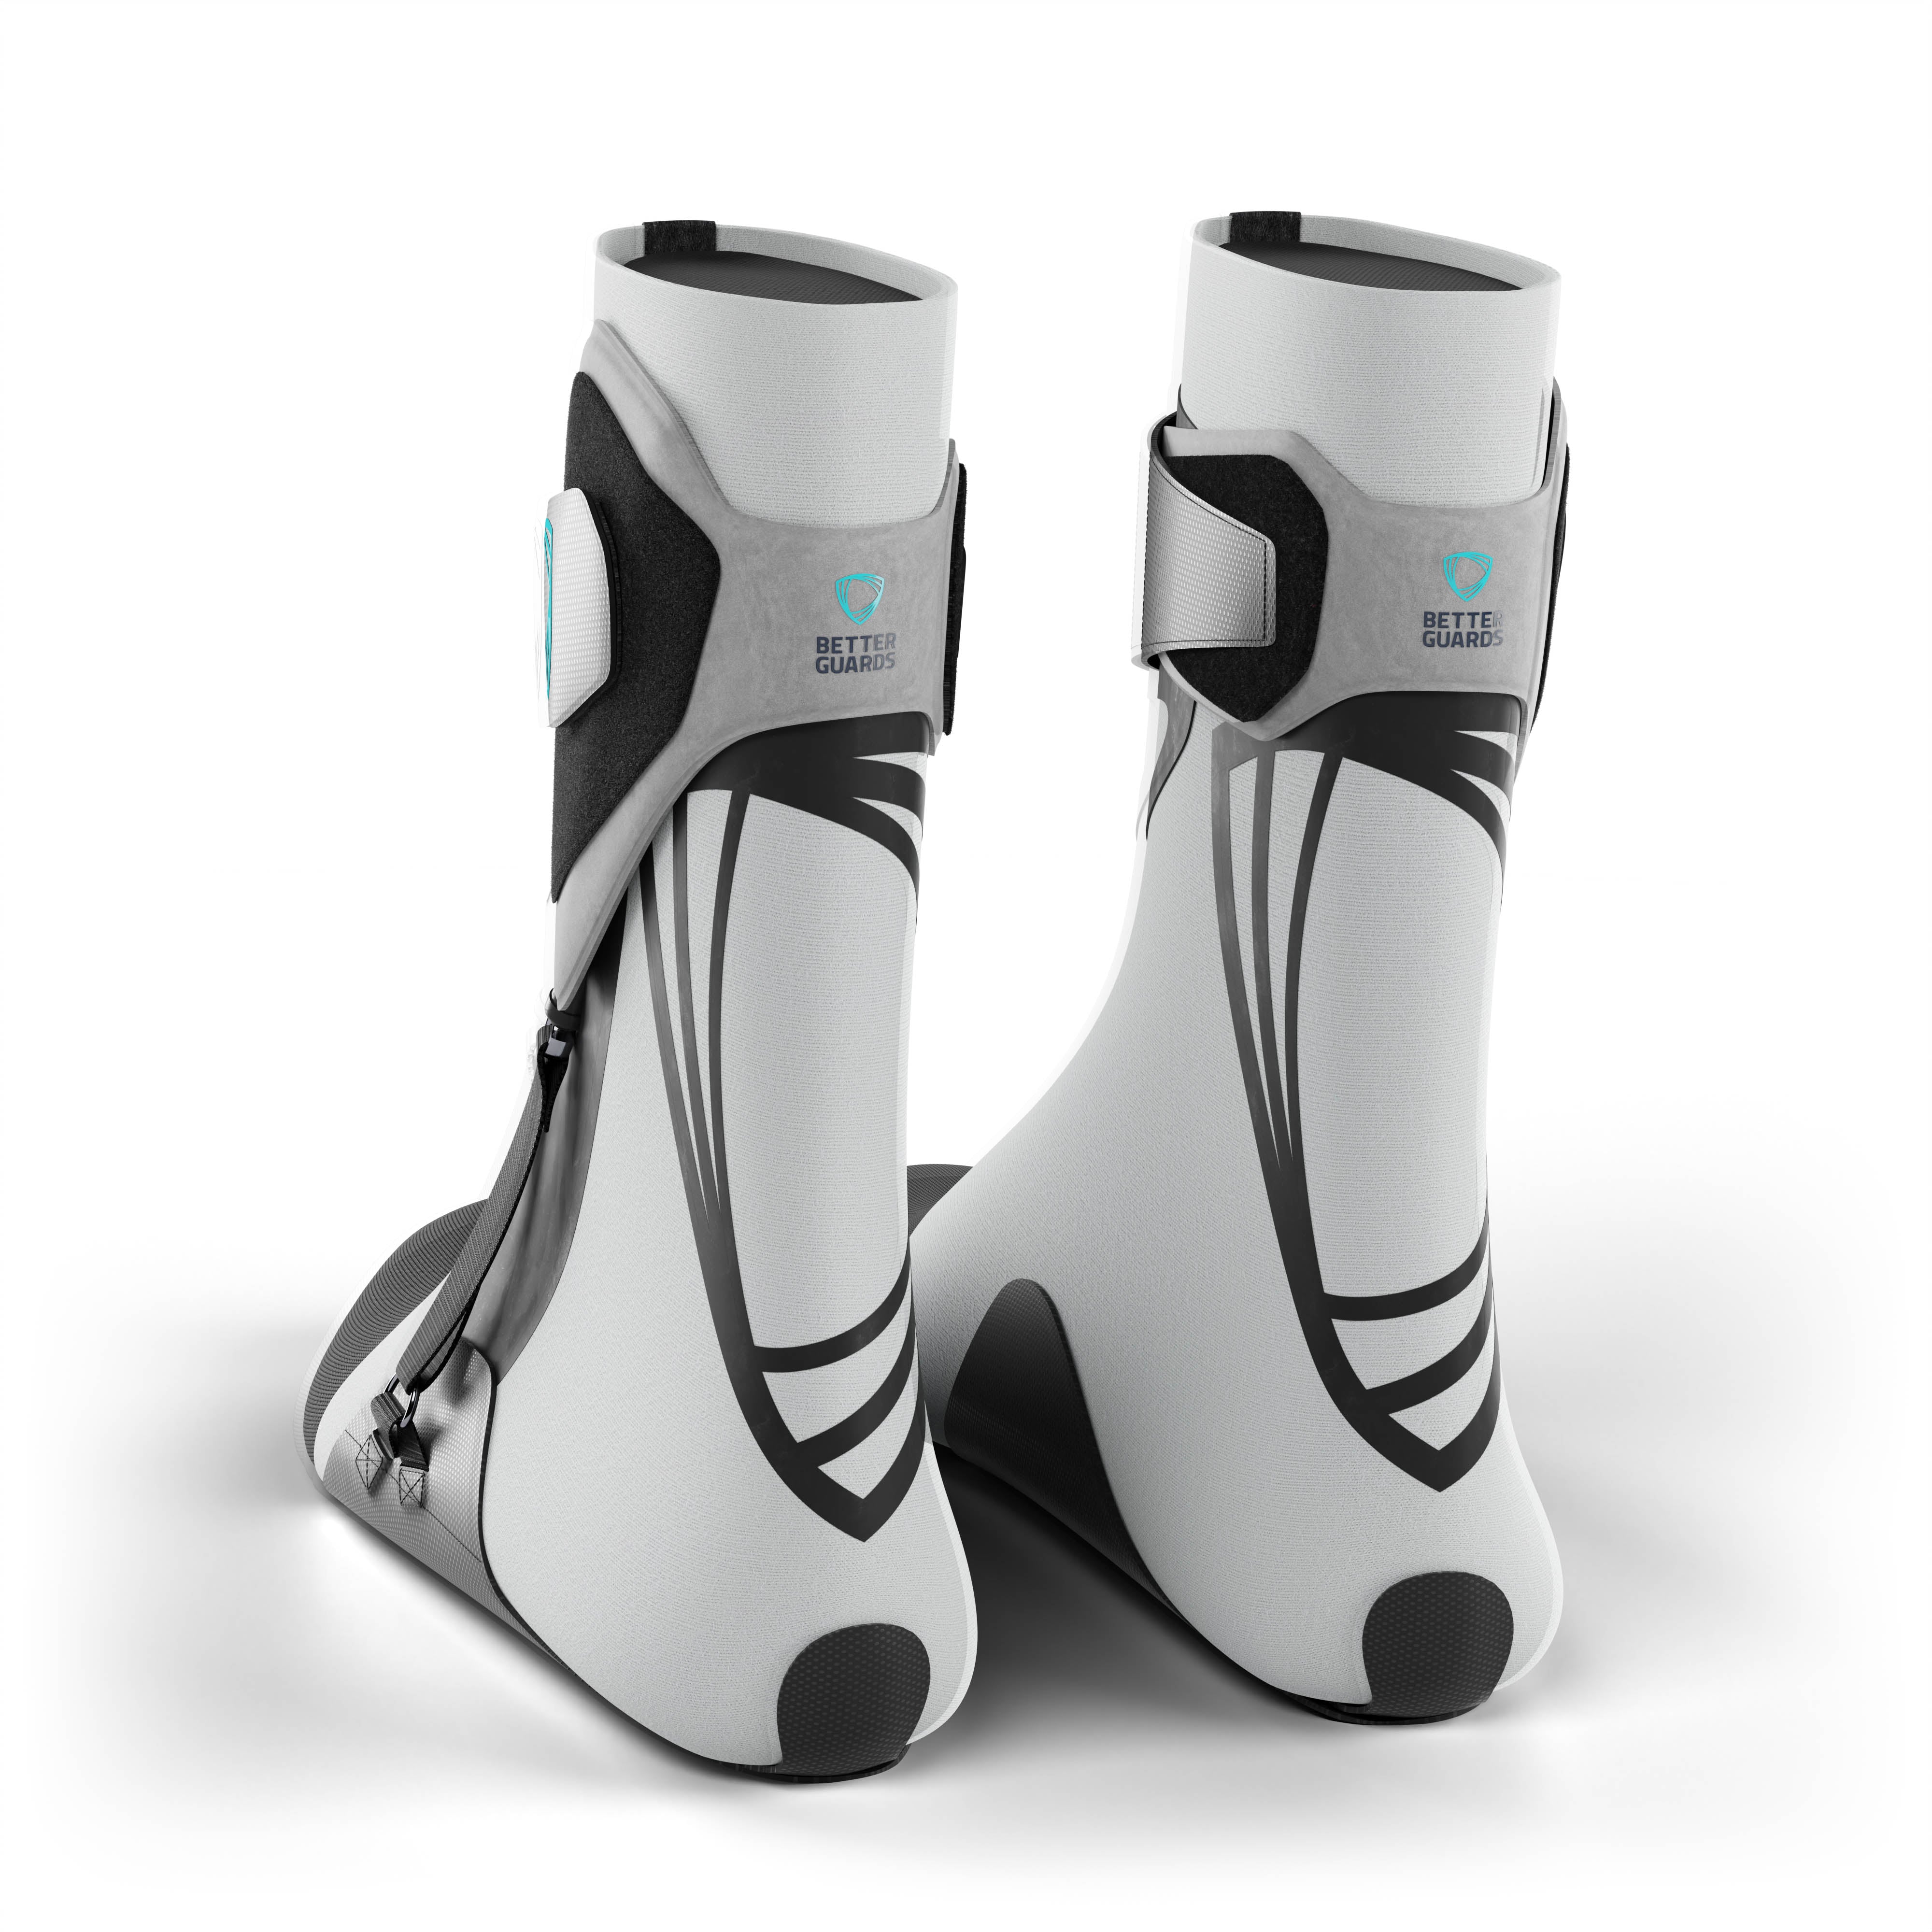 Pair of the best ankle braces for all sports ankle support. Back view. #color_gray